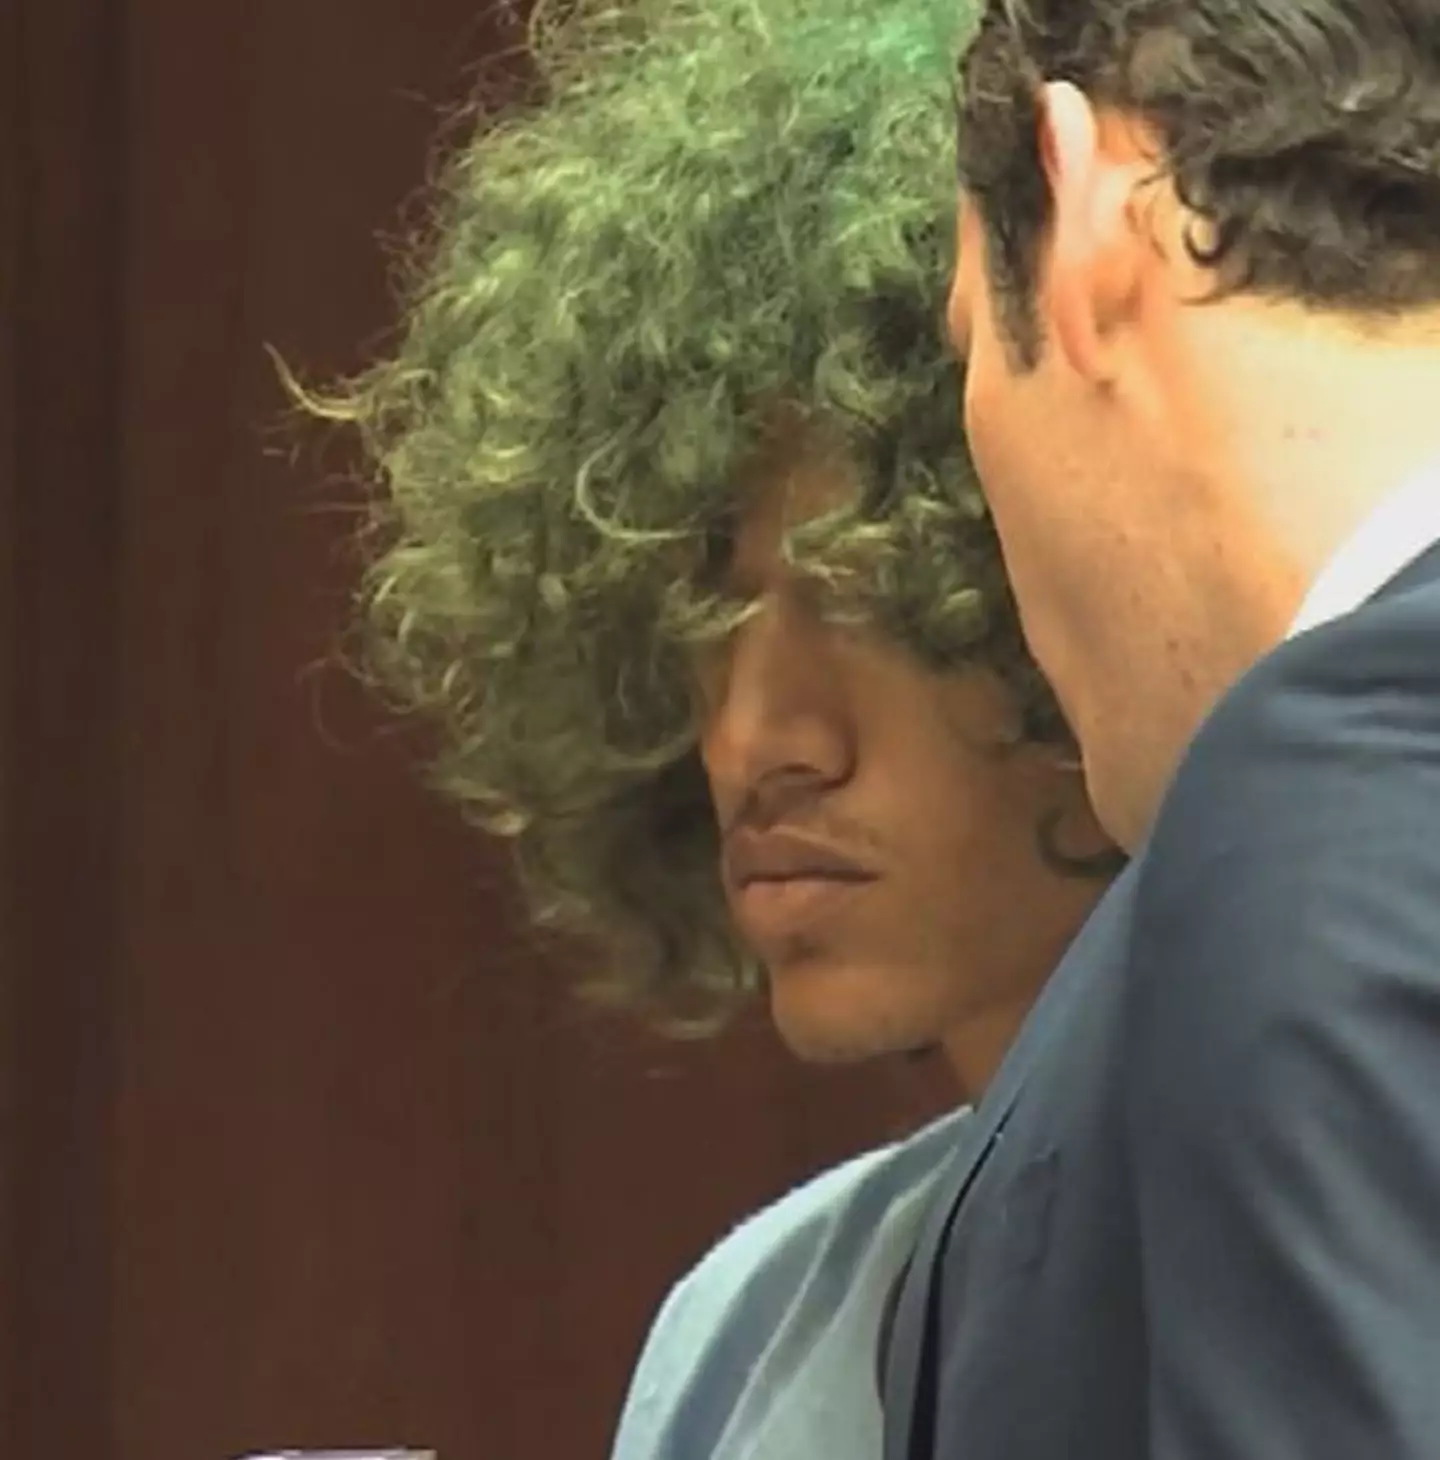 Brown was also sentenced to 20 years for the kidnapping of a child (Hawaii News Now)